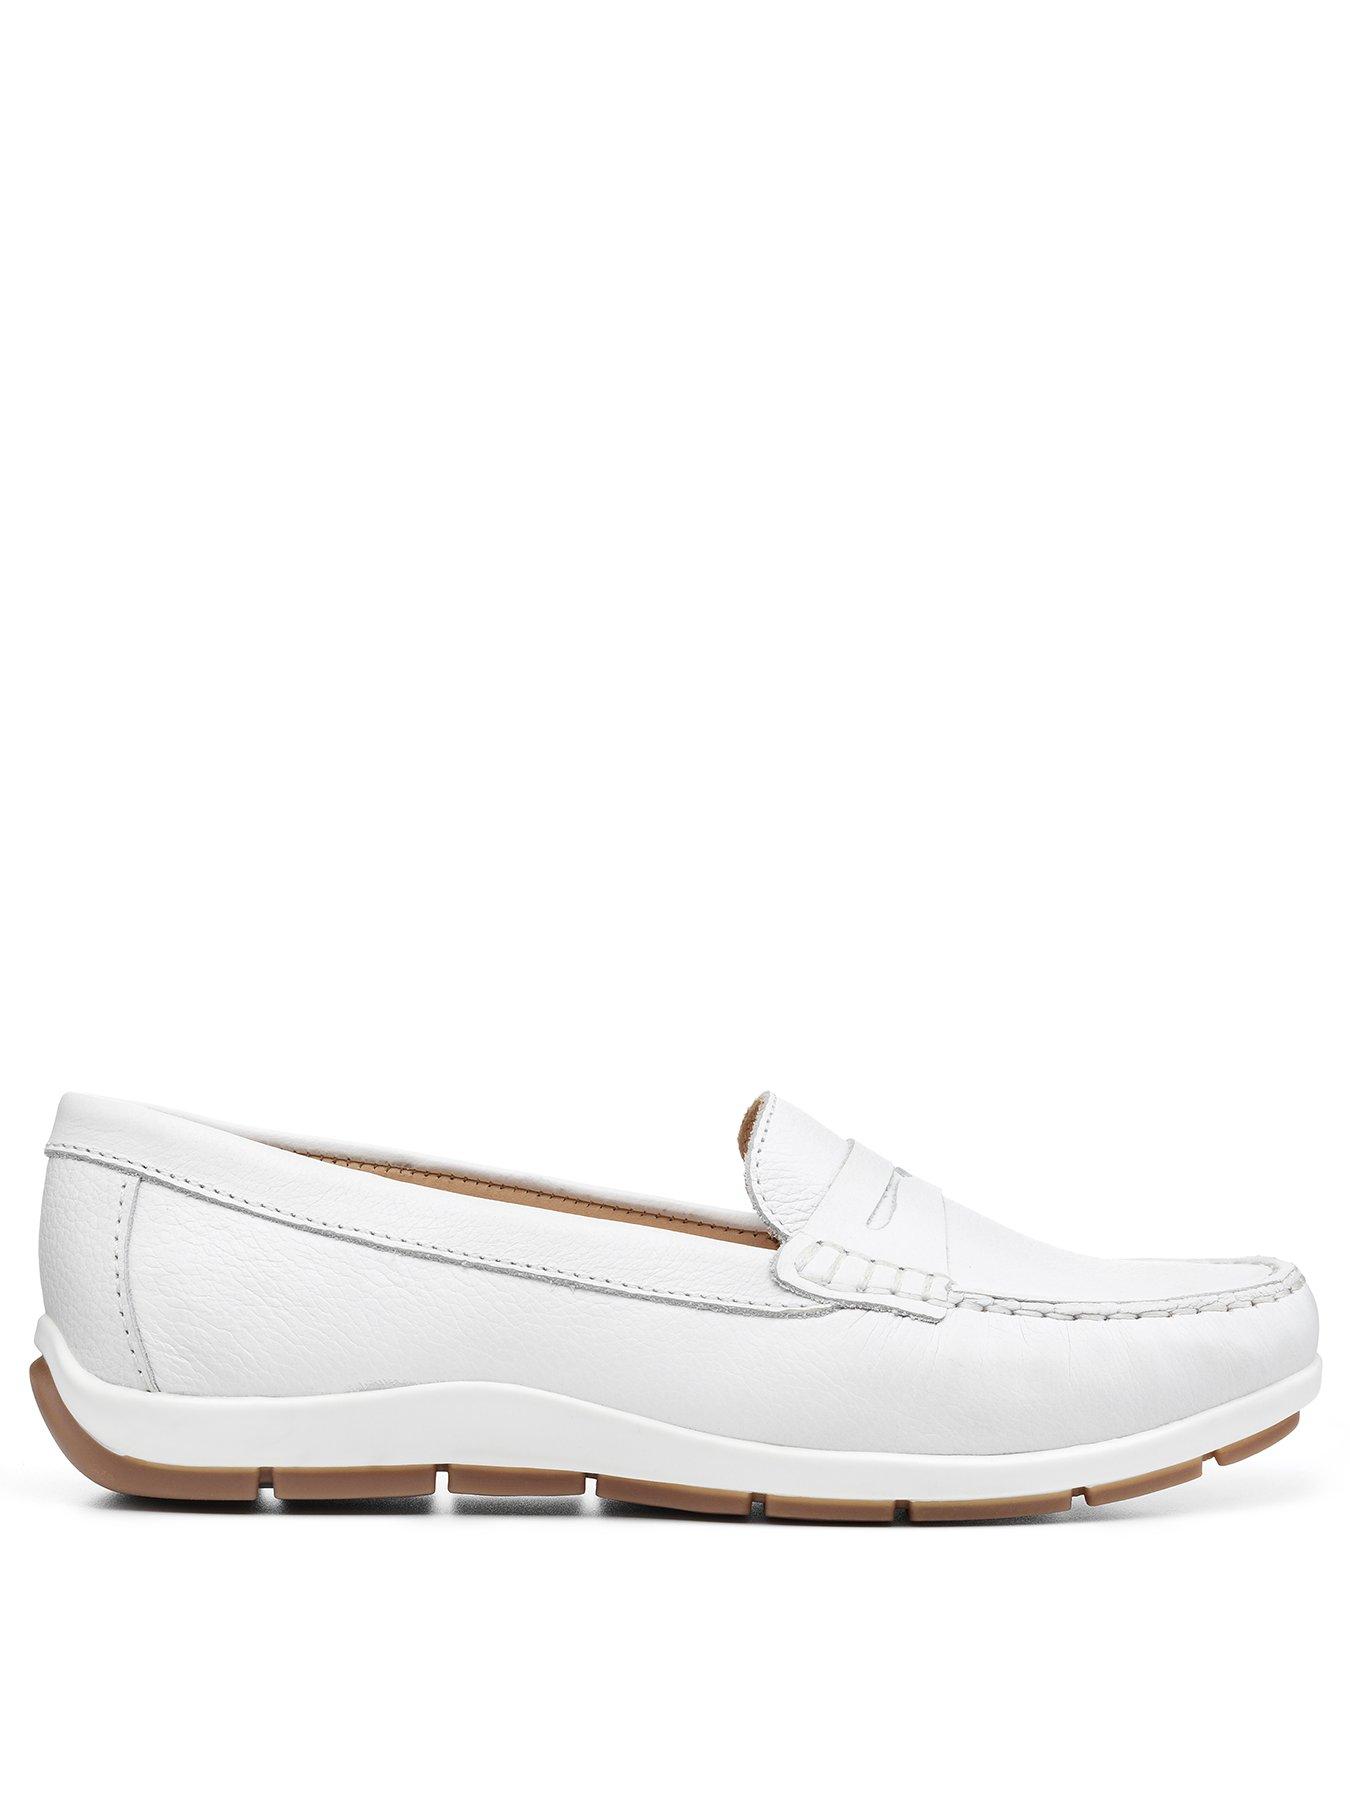 Shoes & boots Drift Loafer - White